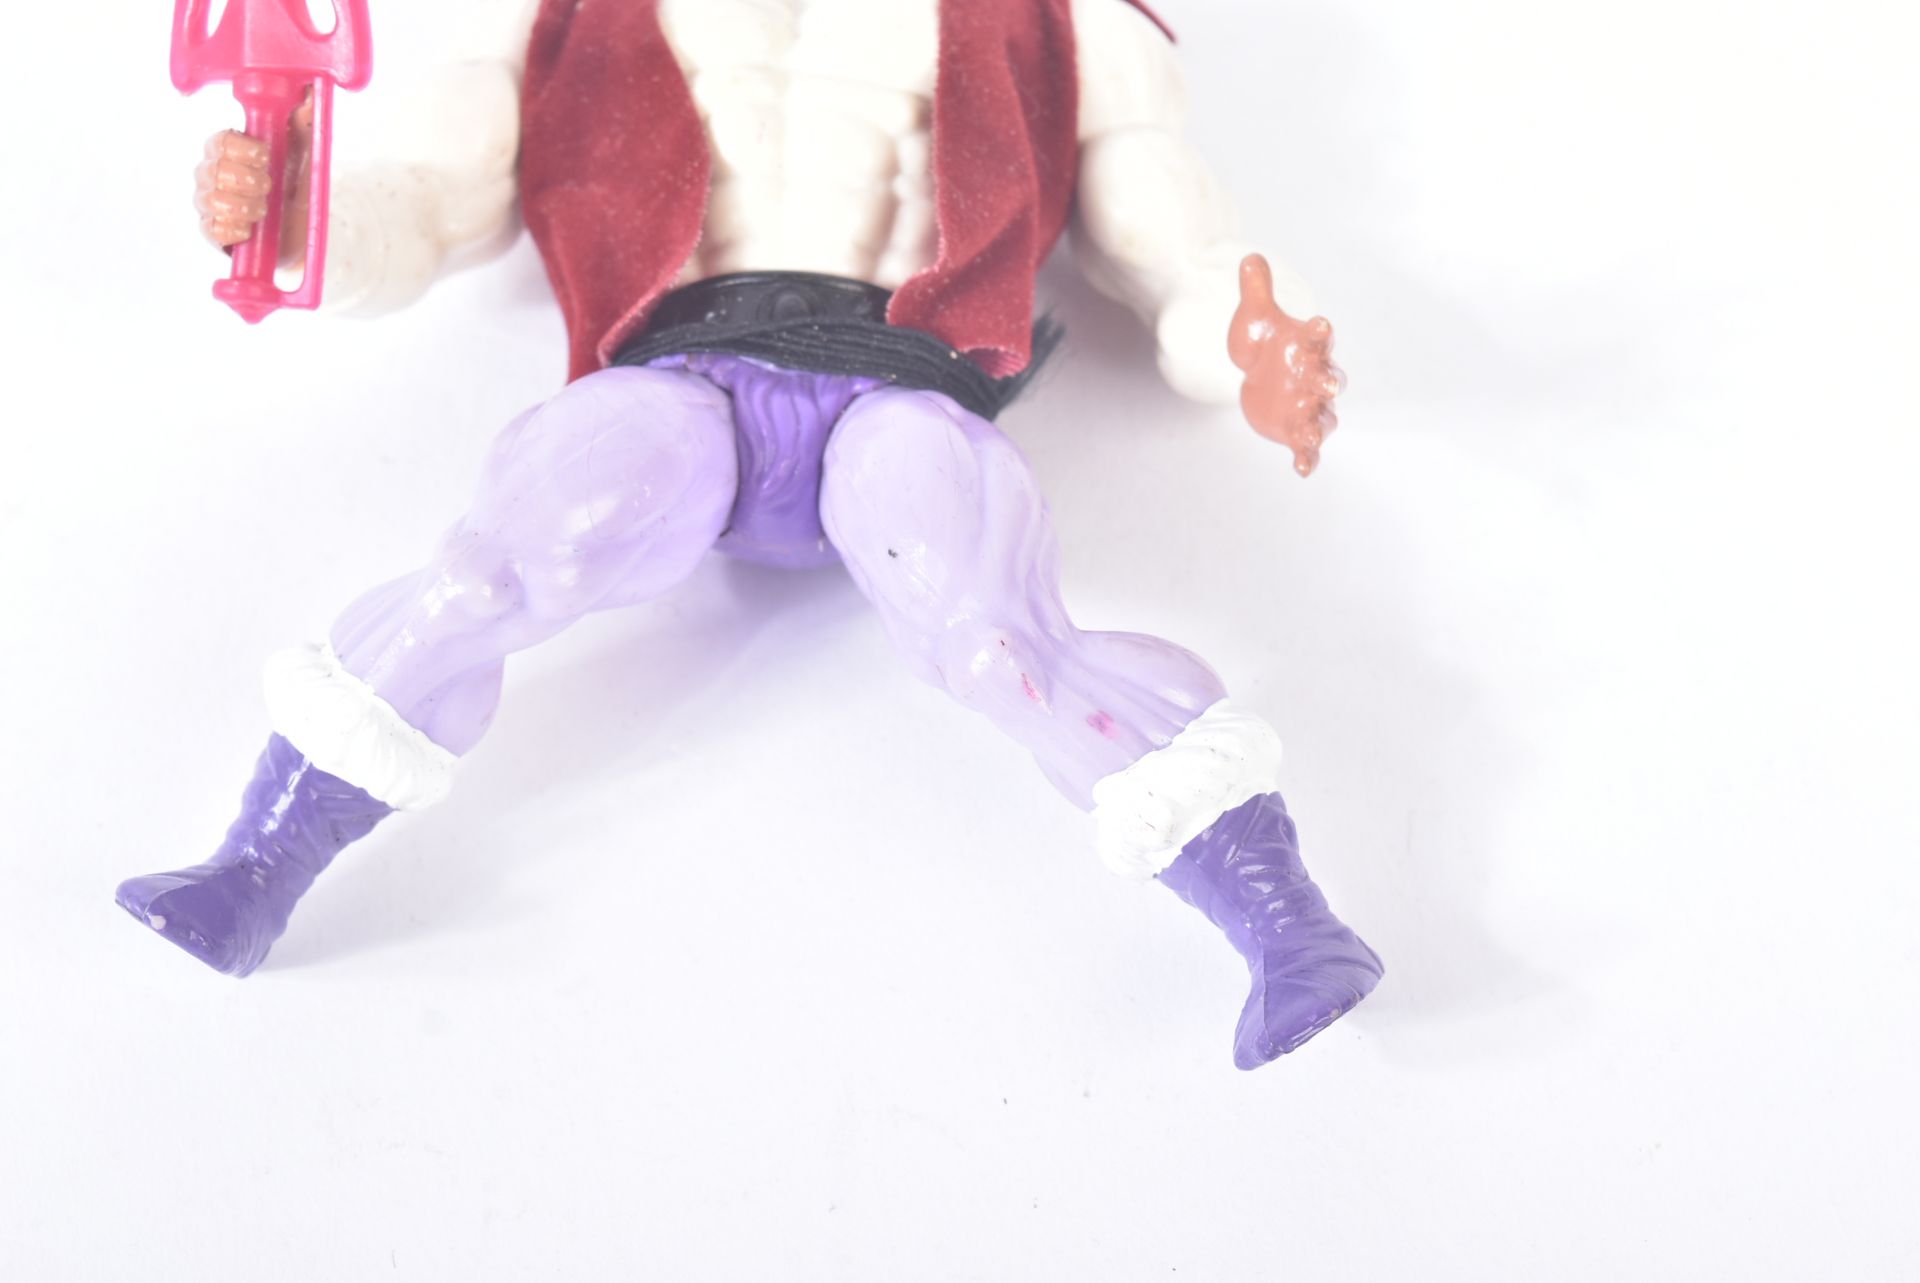 MASTERS OF THE UNIVERSE - VINTAGE MATTEL ACTION FIGURE - Image 5 of 6